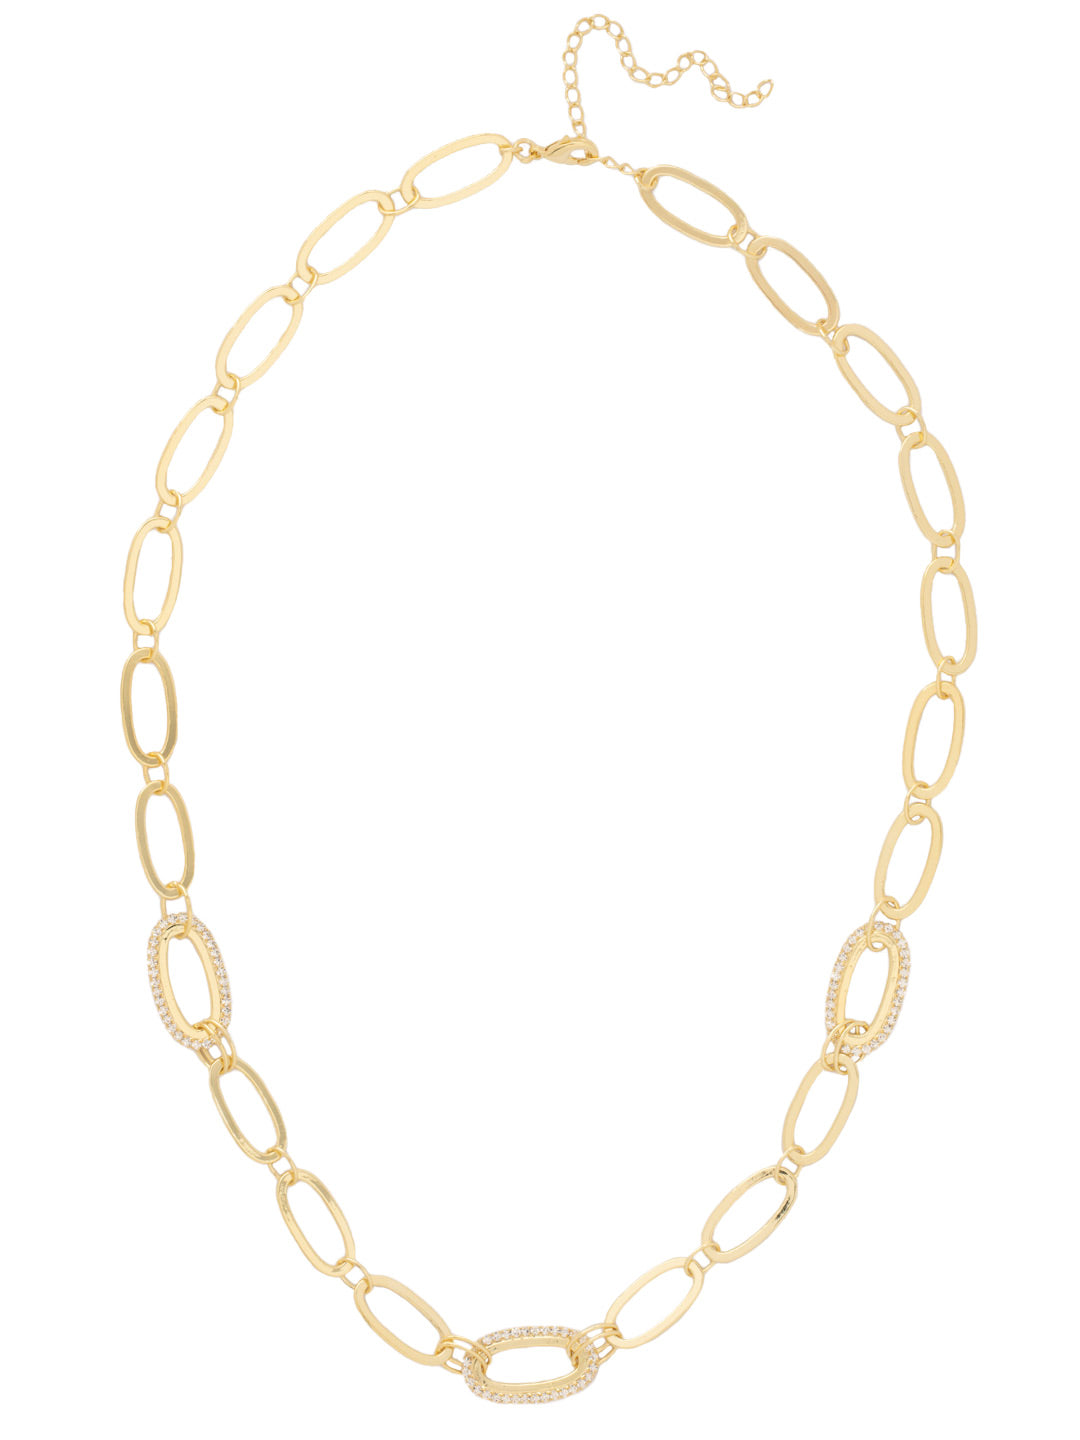 Tori Long Necklace - NFL45BGCRY - <p>The Tori Long Necklace features alternating rhinestone and metal chain links on an adjustable chain secured with a lobster claw clasp. From Sorrelli's Crystal collection in our Bright Gold-tone finish.</p>